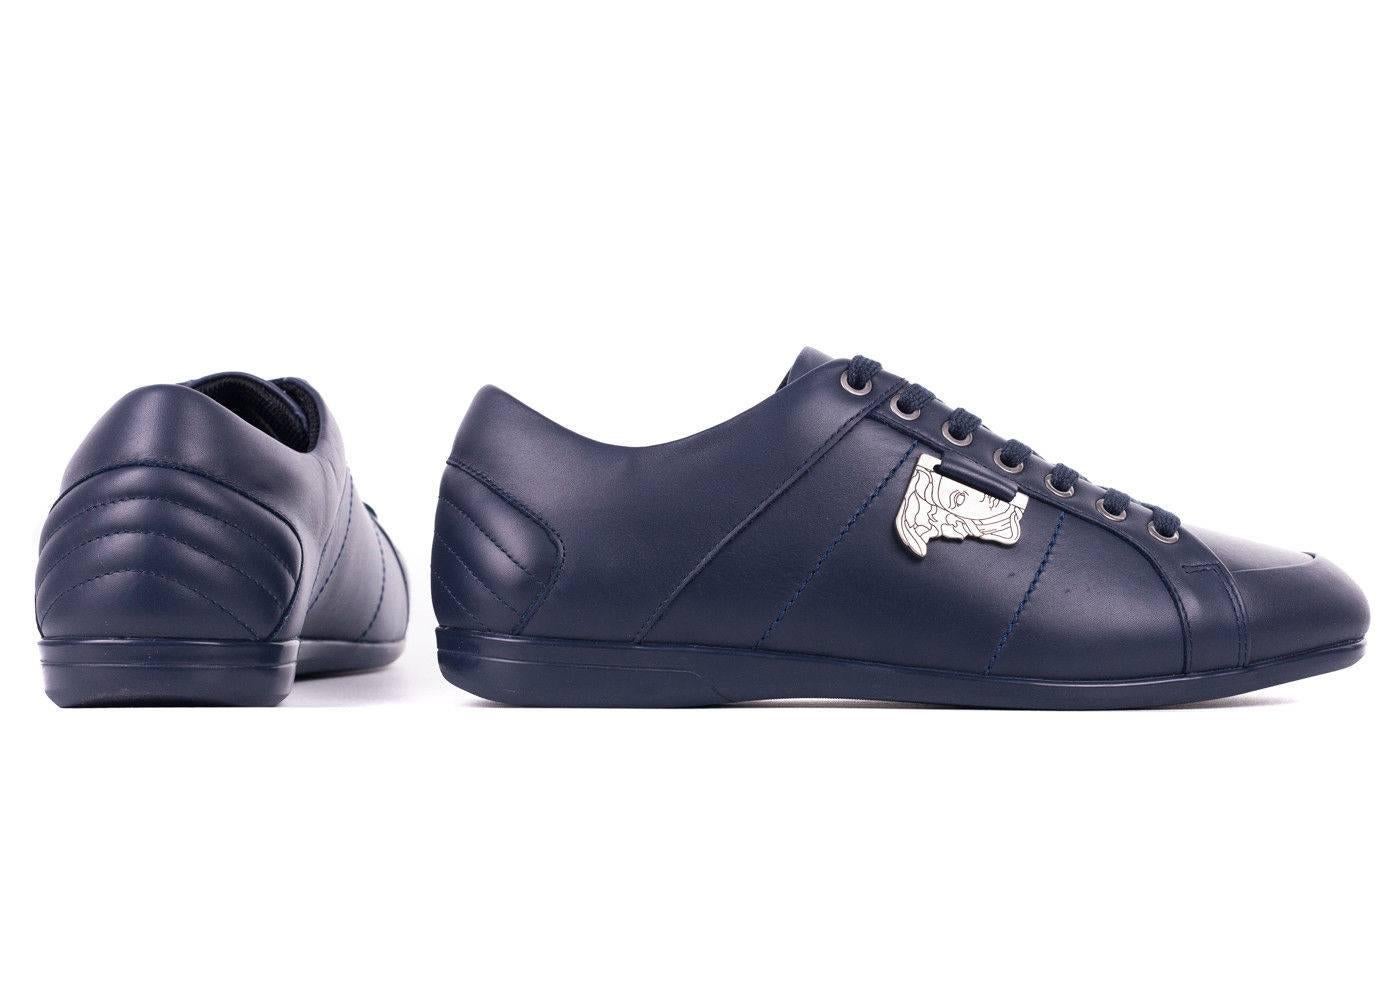 Top off your outfit off with Versace's Navy Low Top Sneakers. This genuine leather masterpiece features Versace's signature Medusa Medallion on the side, tonal stitching, and a modern almond toe silhouette.

100% Leather
Navy Color
Half of Medusa